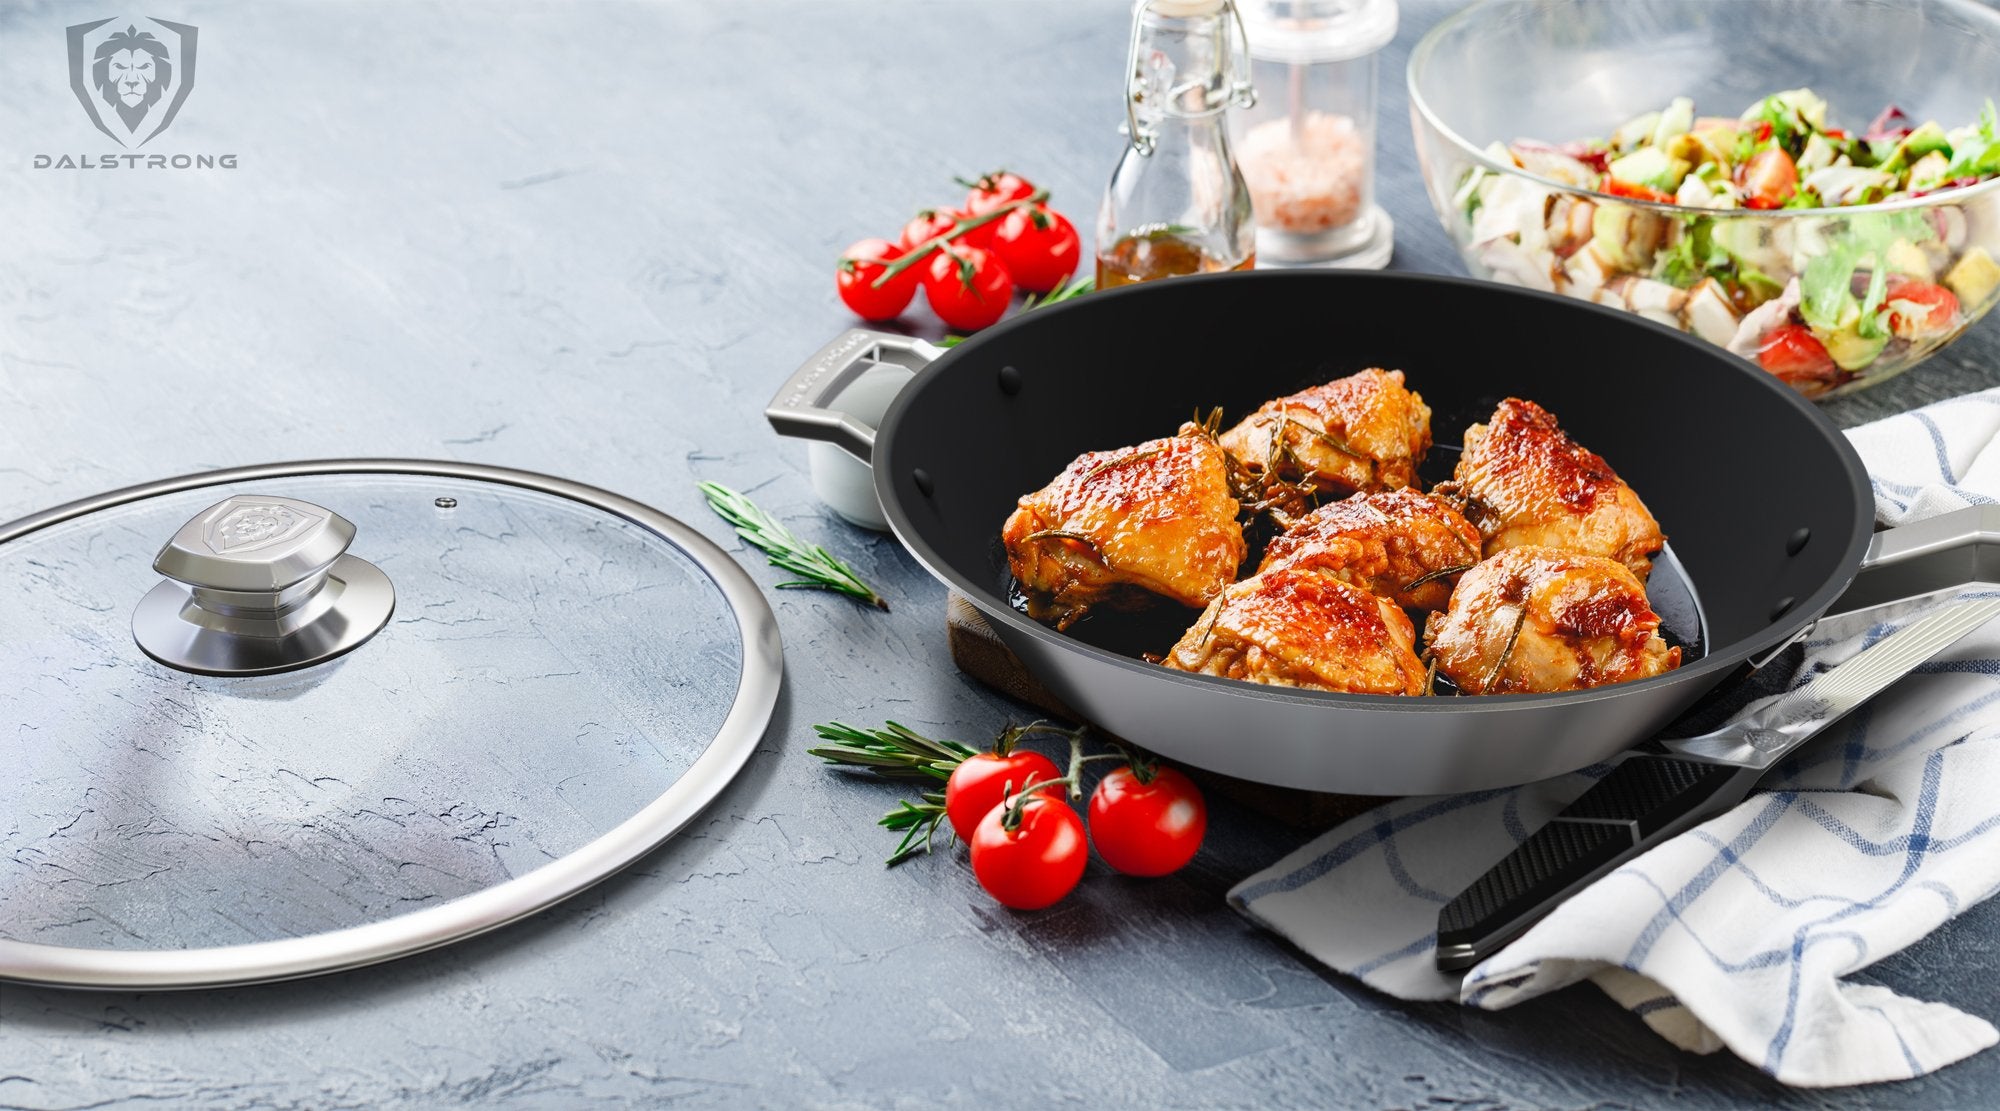 Skillets - Stock Culinary Goods